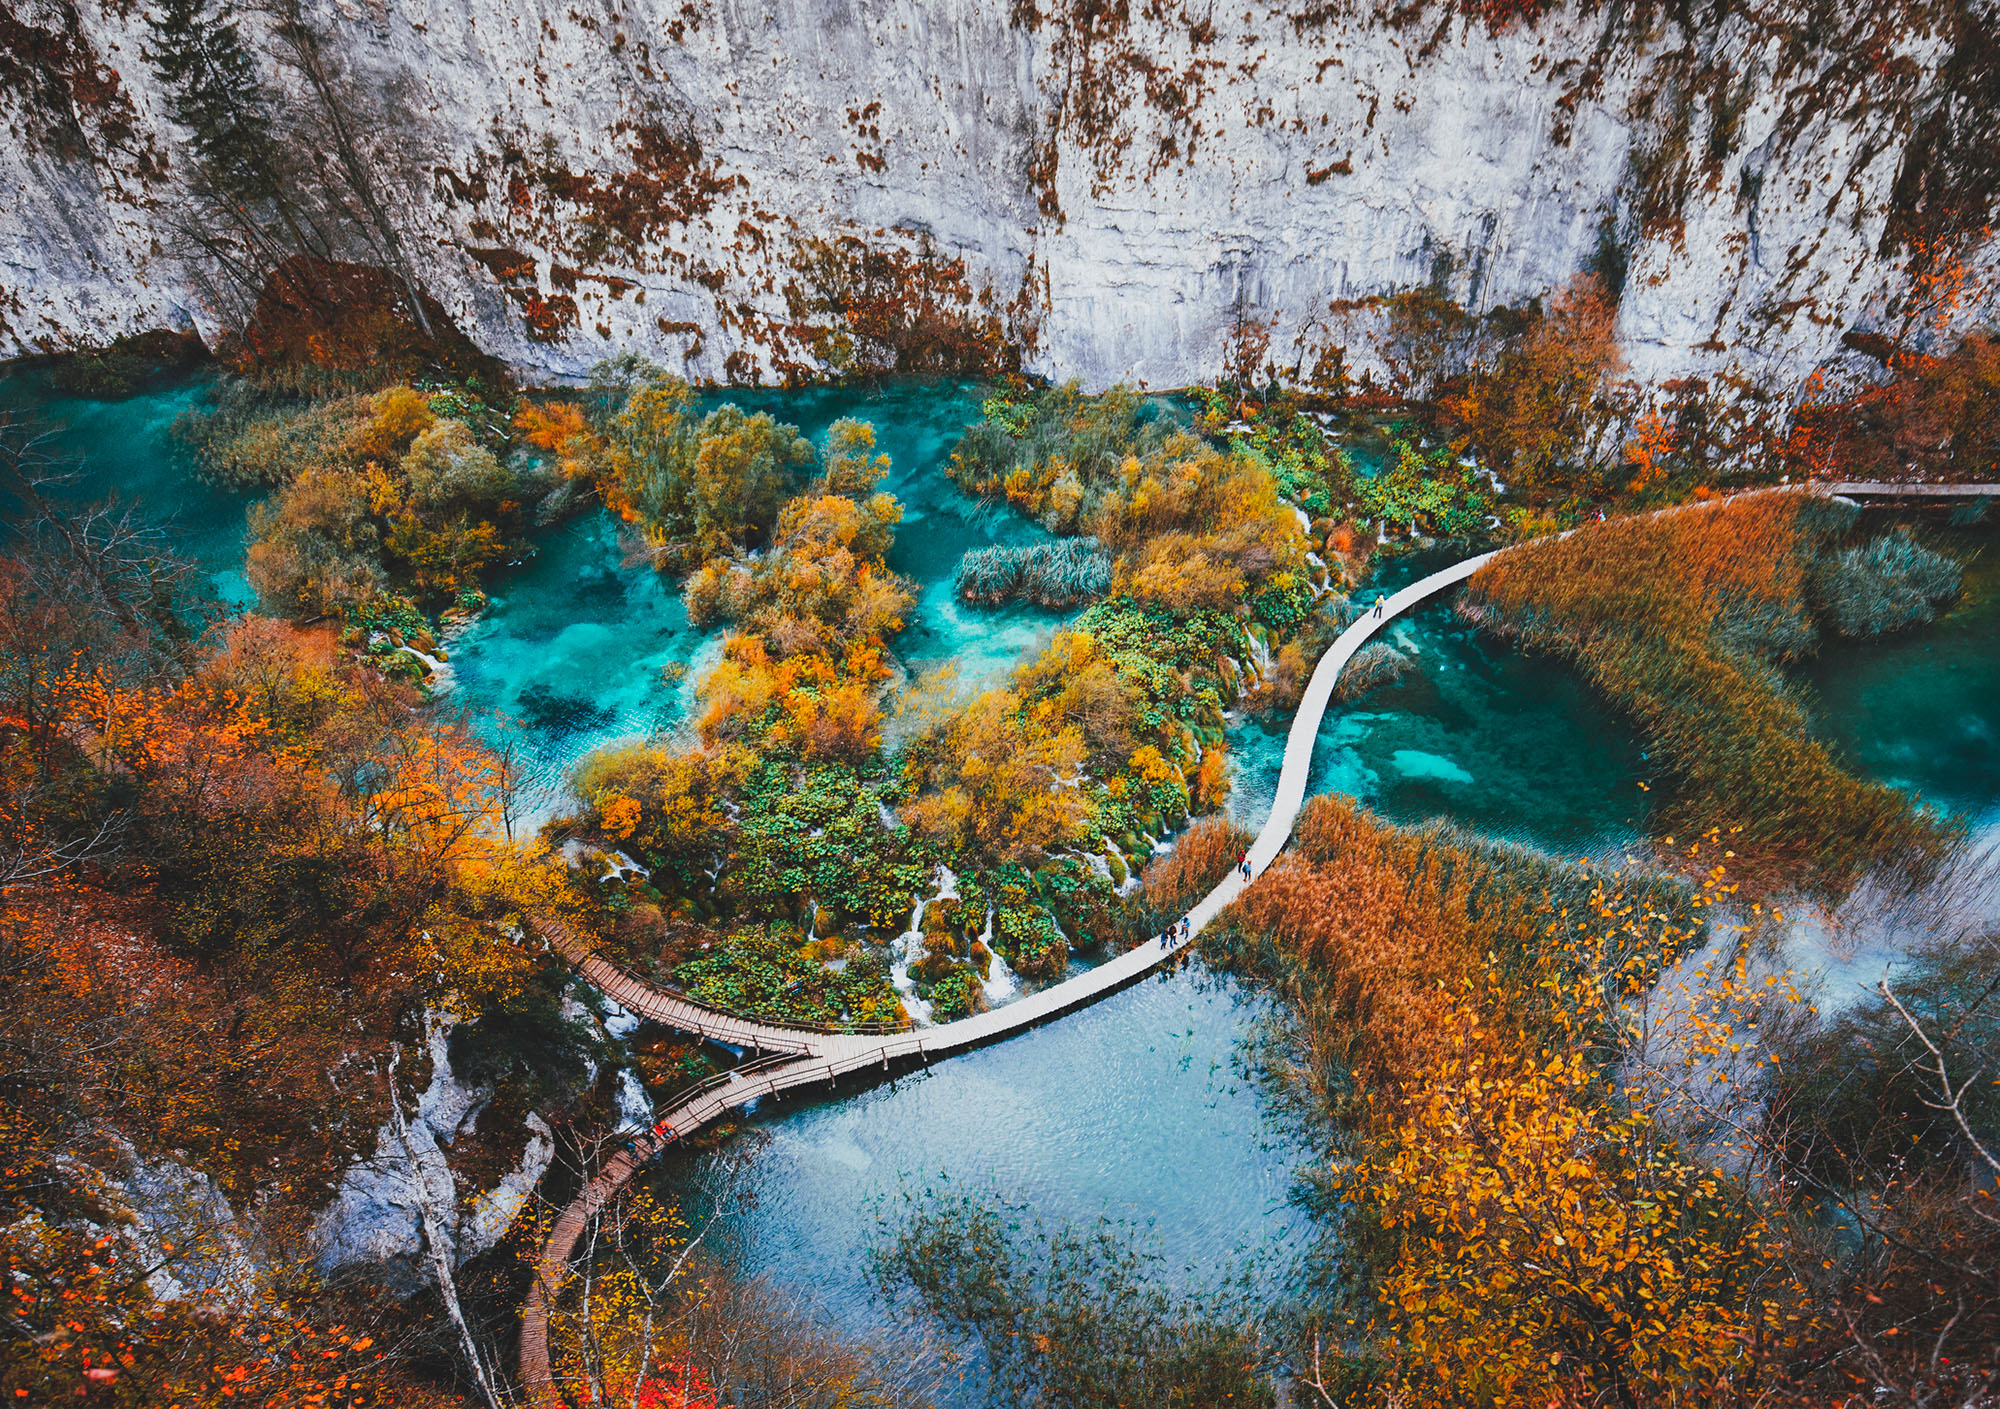 Visit the Plitvice Lakes National Park in Croatia